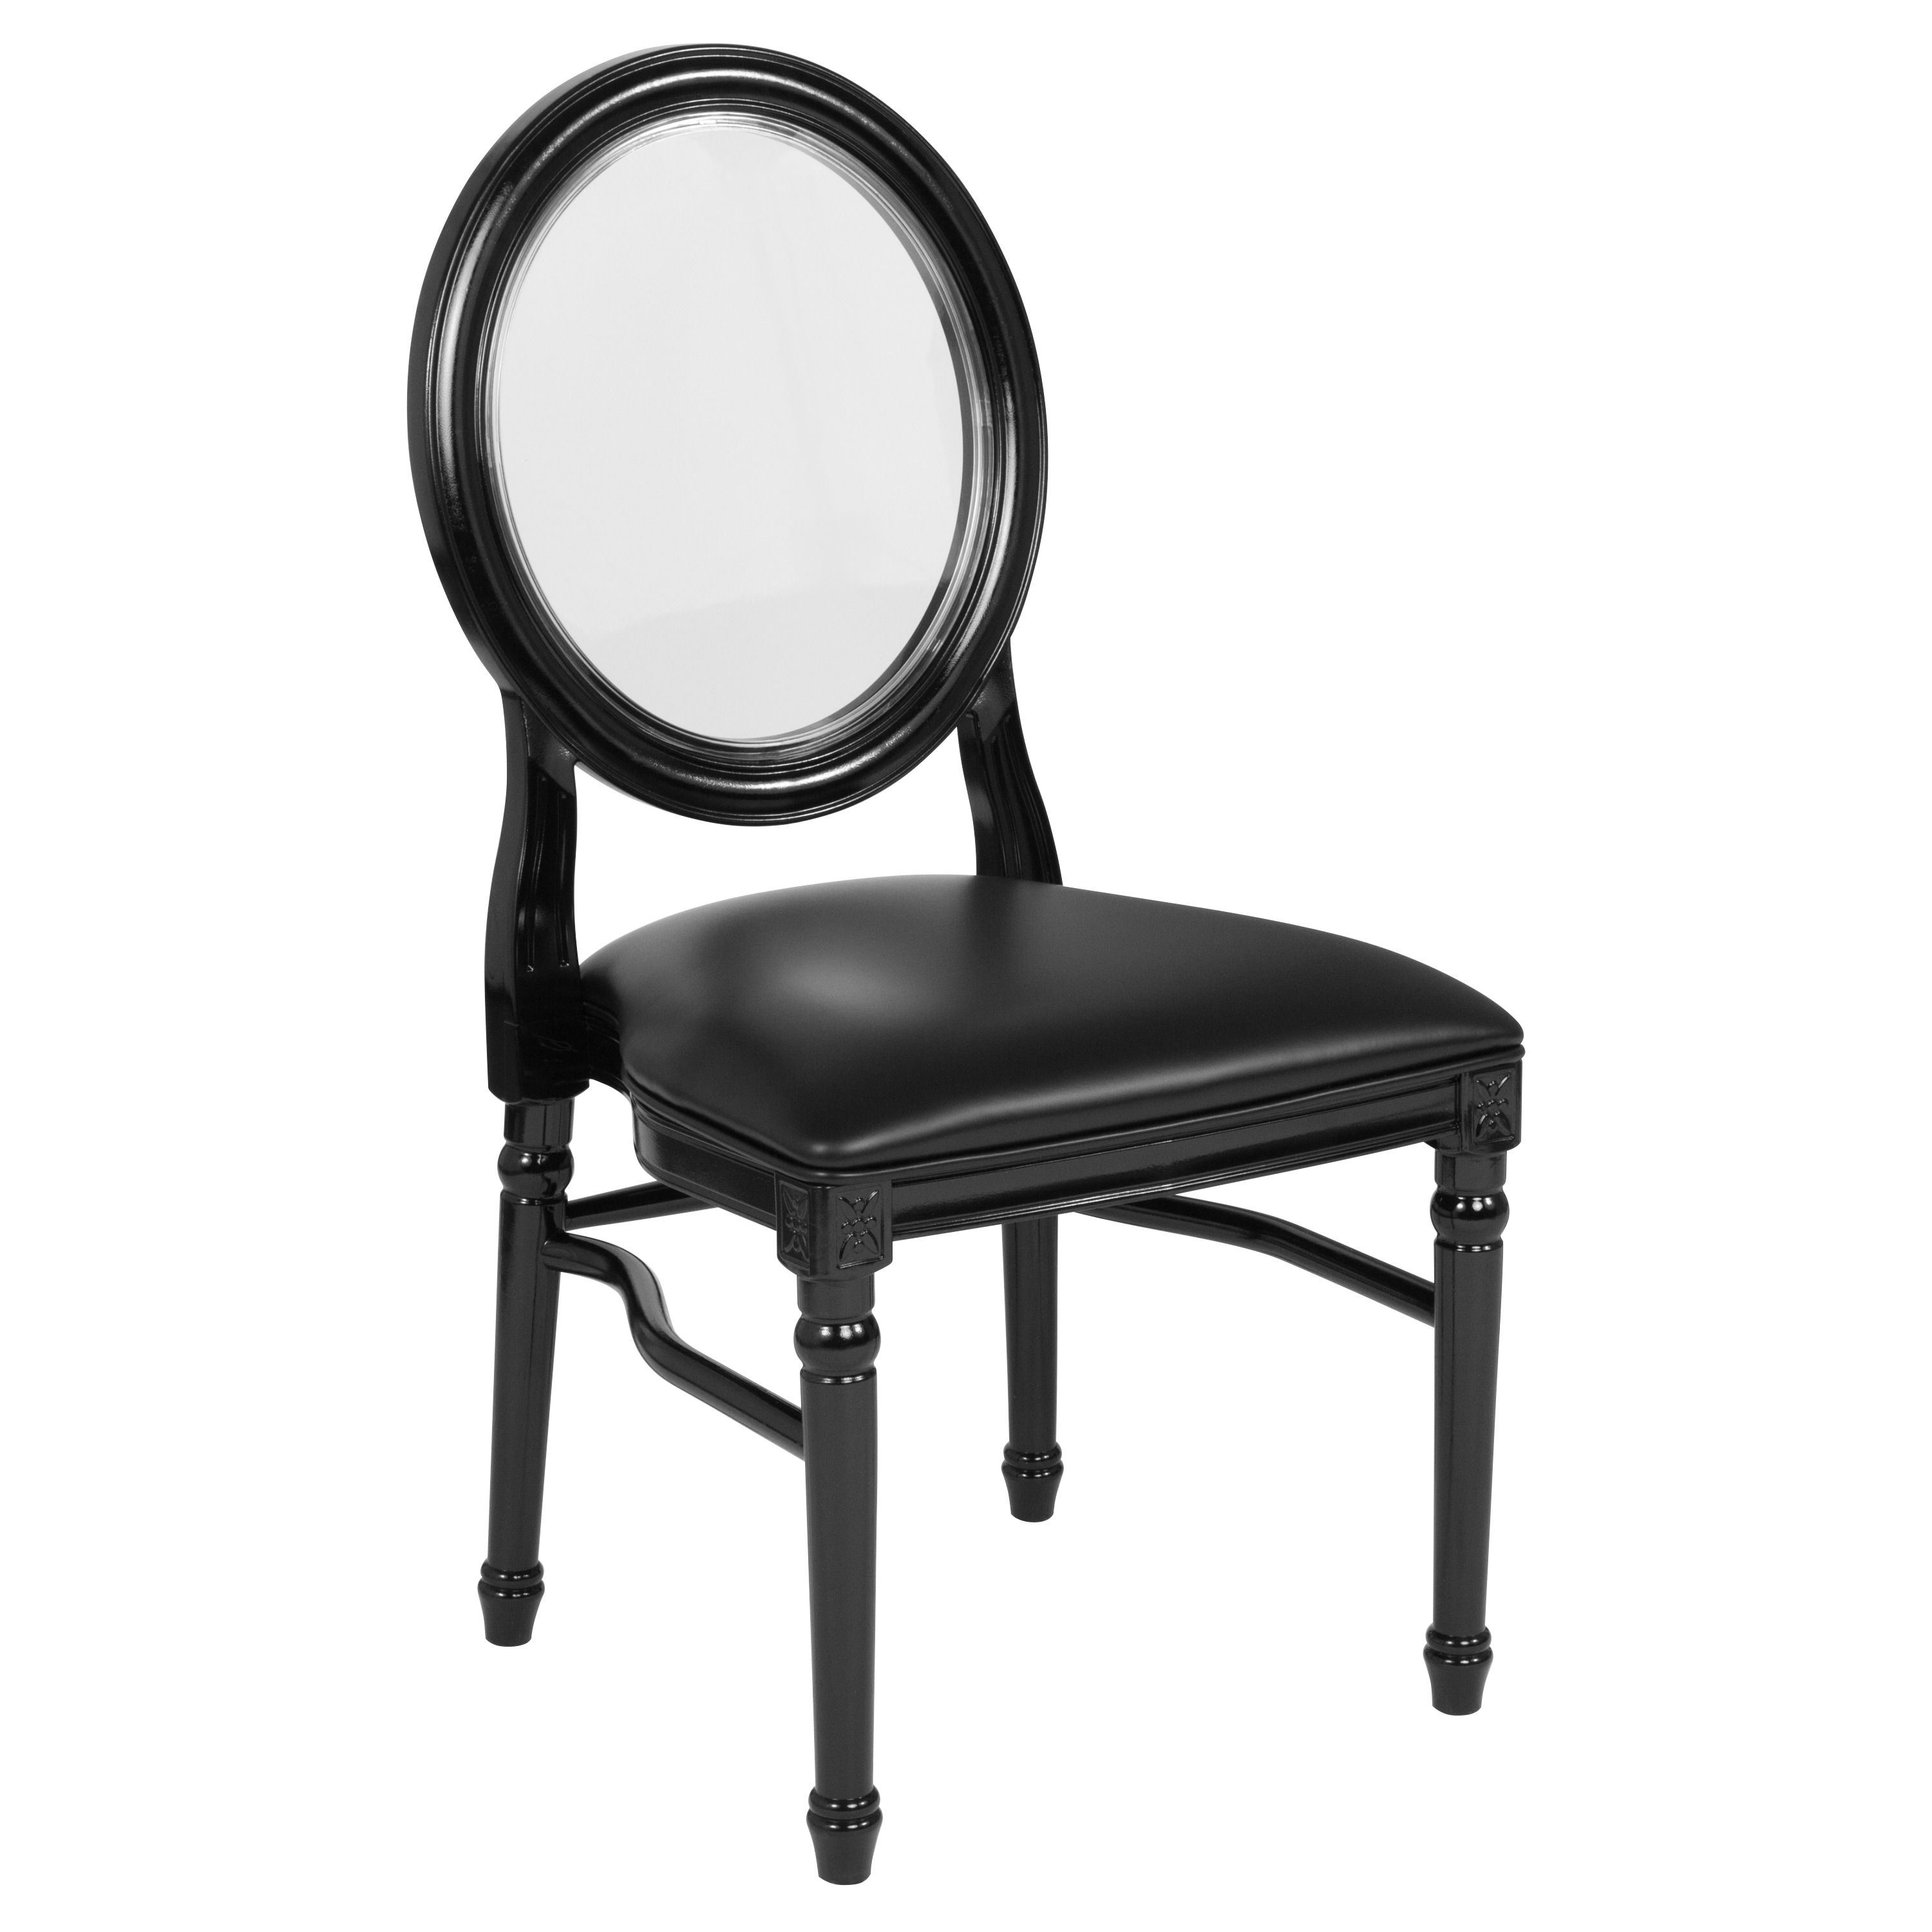 Jubei King Louis Back Side Chair Dining Chair Rosdorf Park Upholstery Color: Black